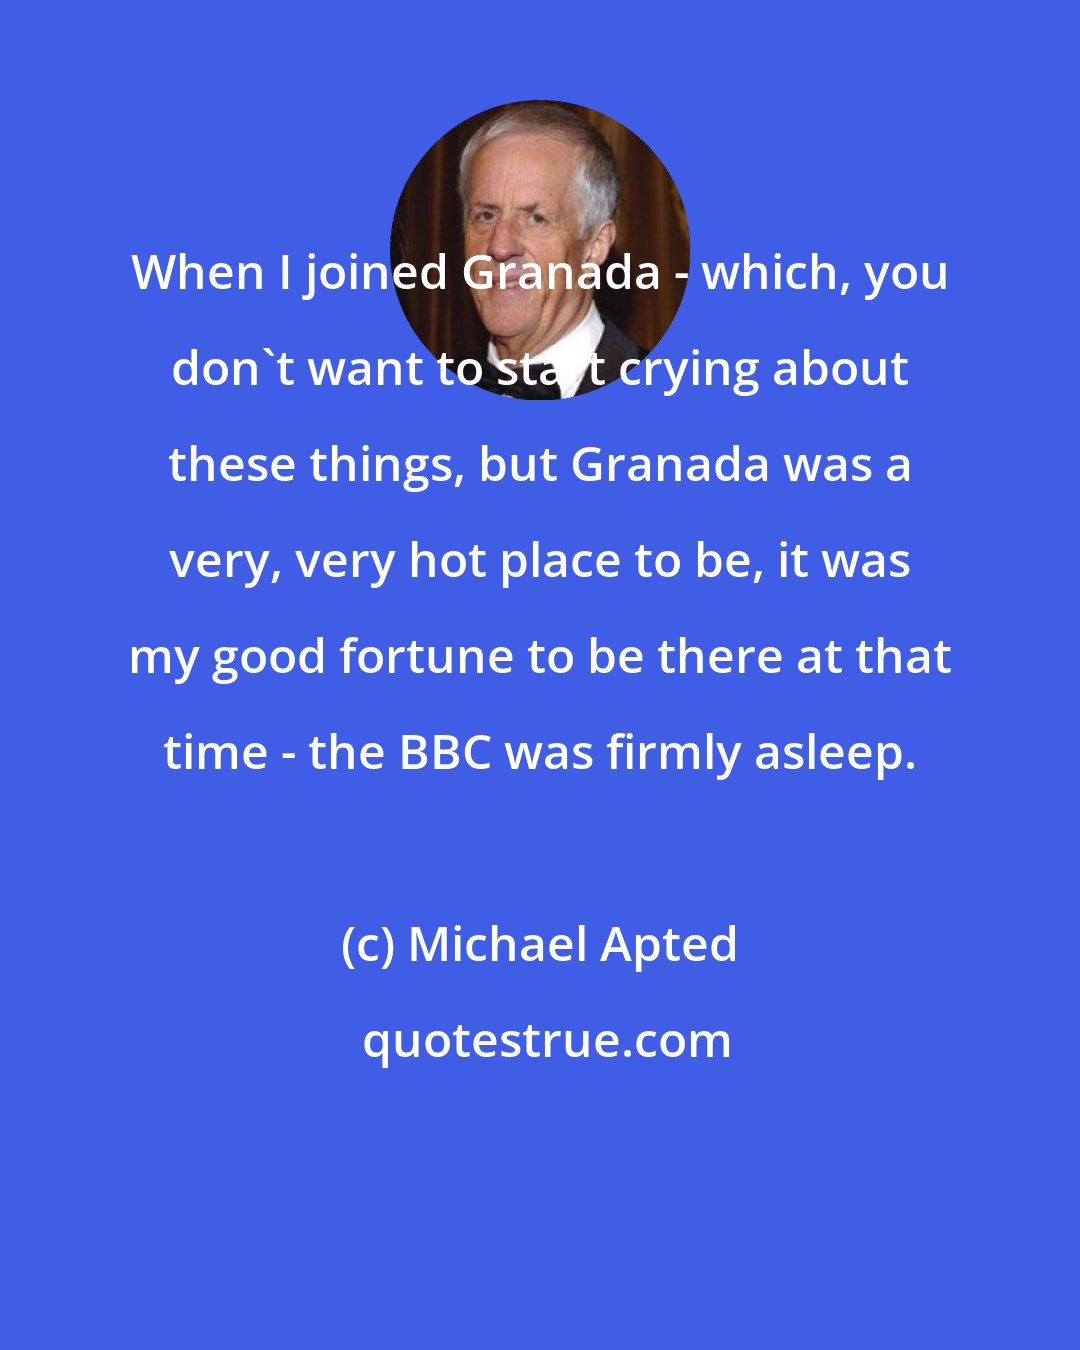 Michael Apted: When I joined Granada - which, you don't want to start crying about these things, but Granada was a very, very hot place to be, it was my good fortune to be there at that time - the BBC was firmly asleep.